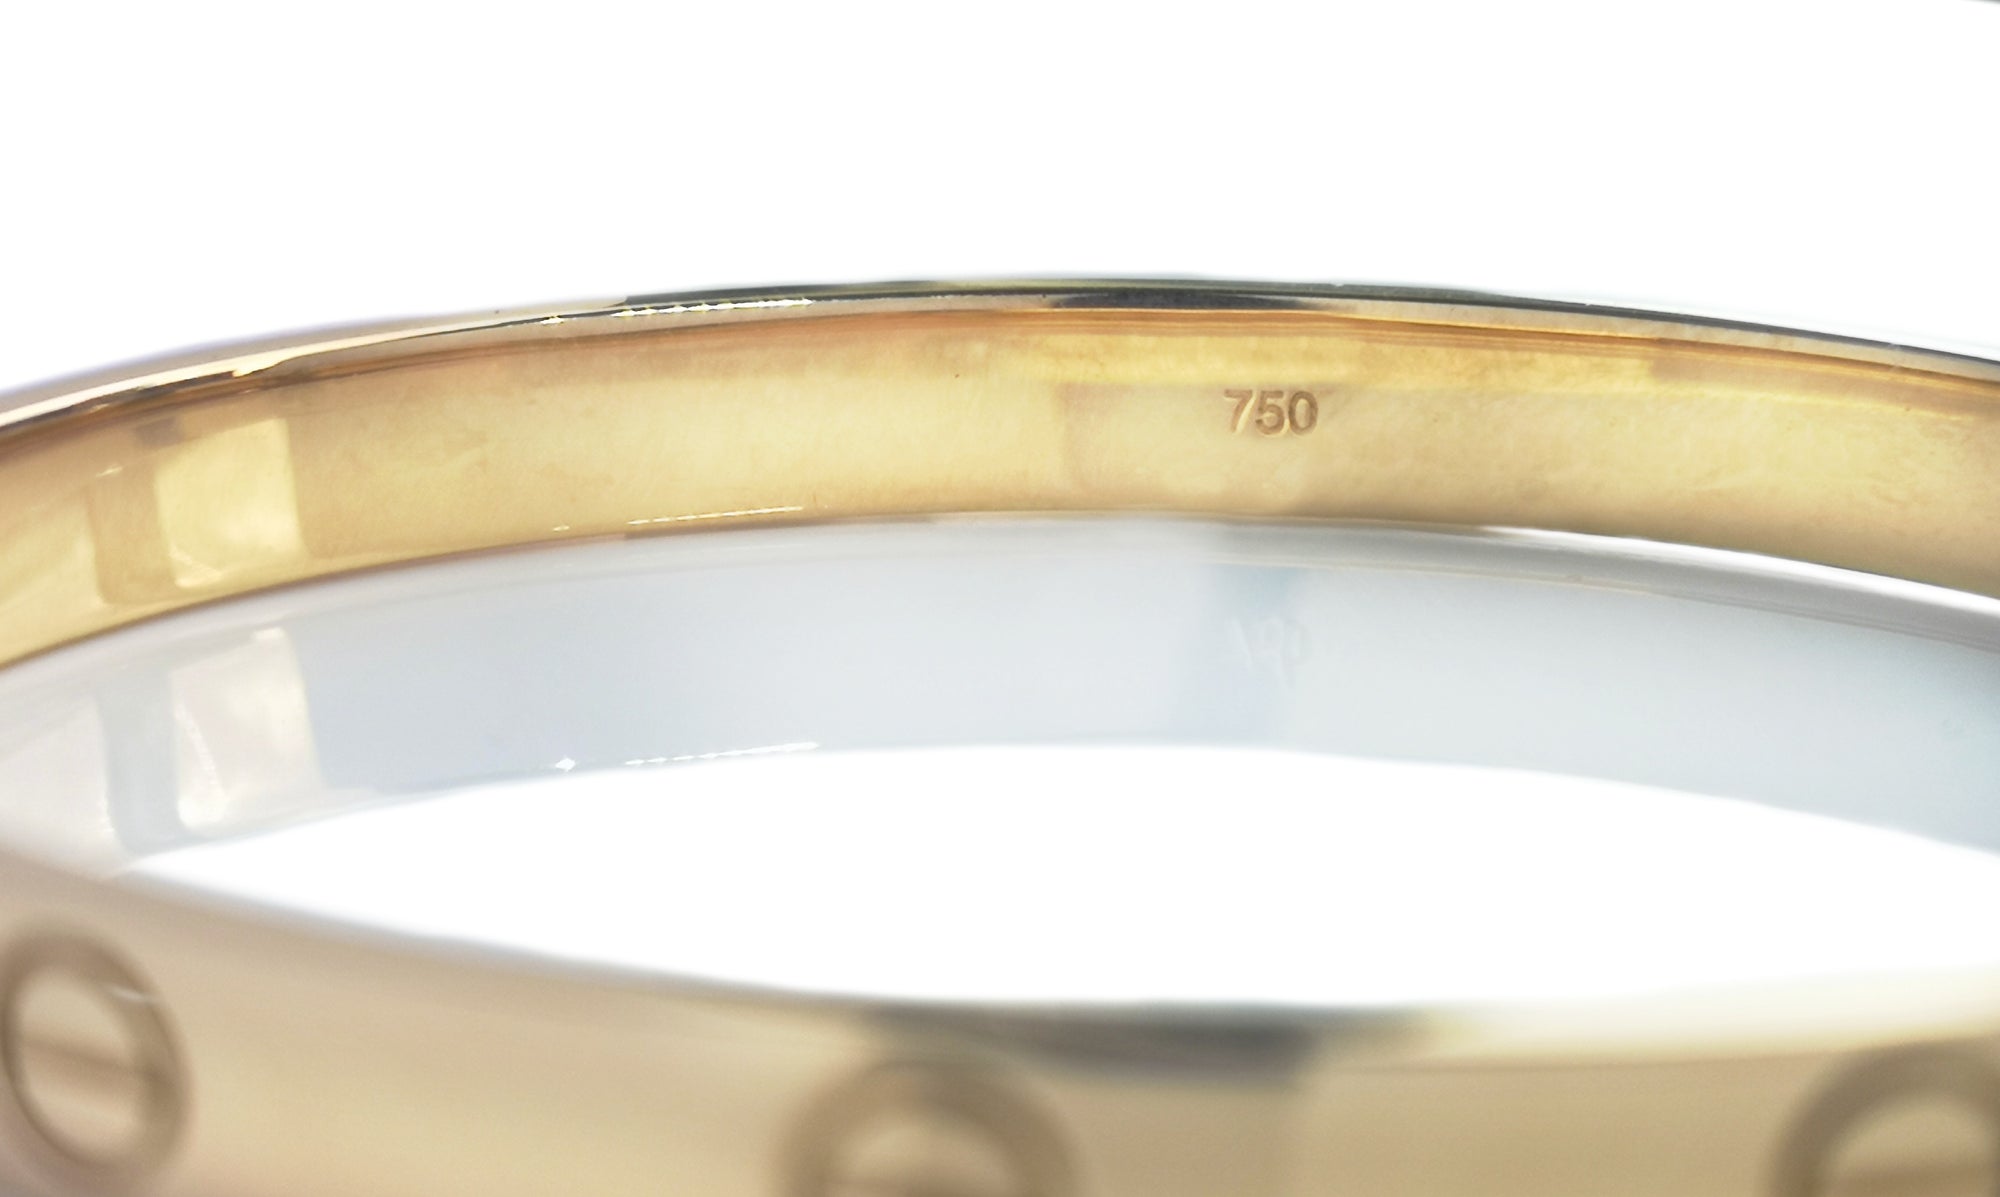 Cartier 18k Yellow Gold Love Bracelet with Certificate, Size 18